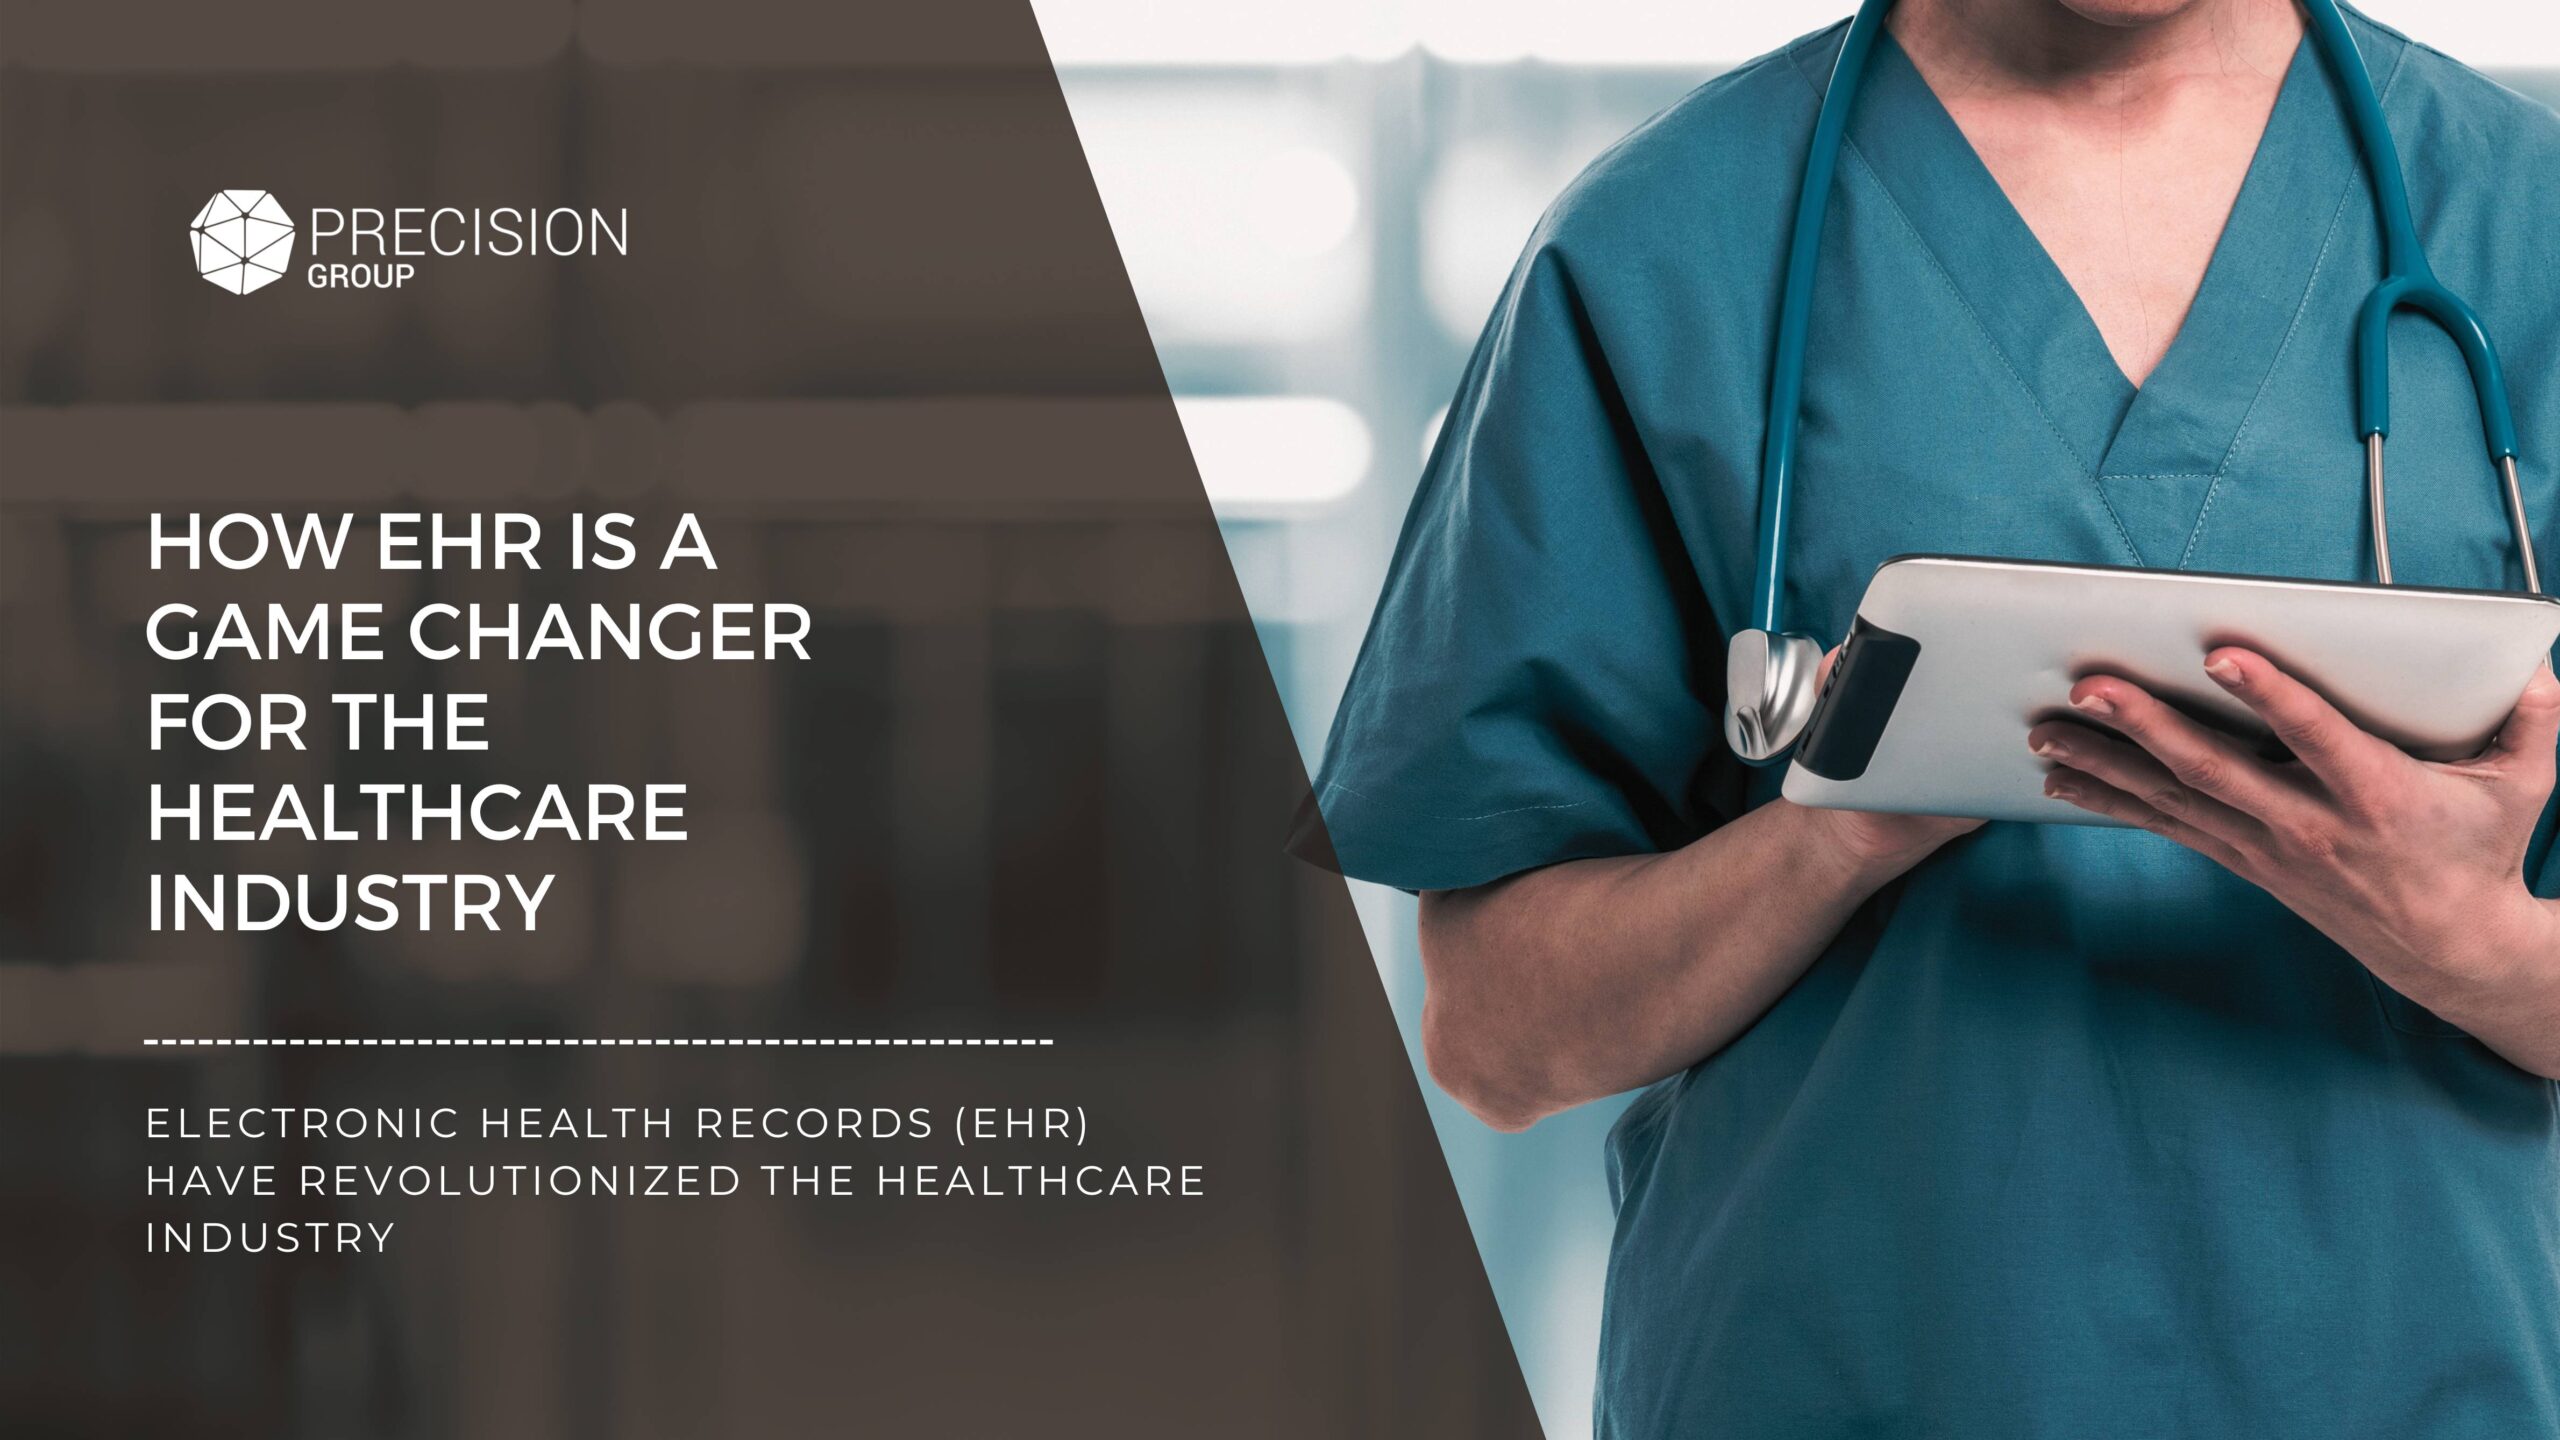 HOW EHR IS A GAME CHANGER FOR THE HEALTHCARE INDUSTRY